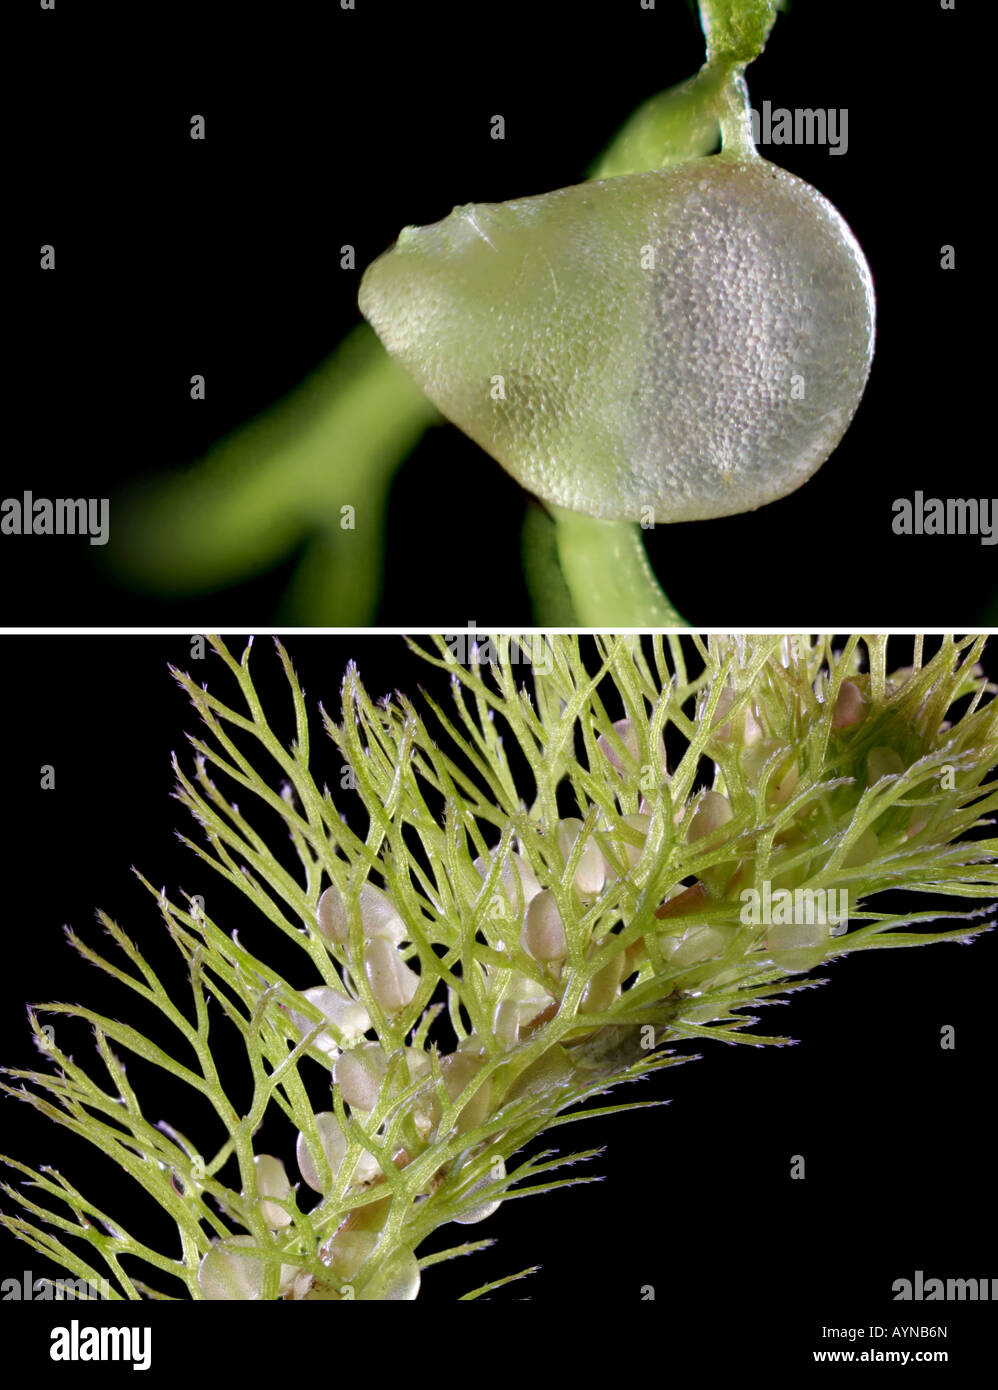 Short length of a bladderwort (Utricularia sp.) stem, with a macro photo of a single bladder. Stock Photo